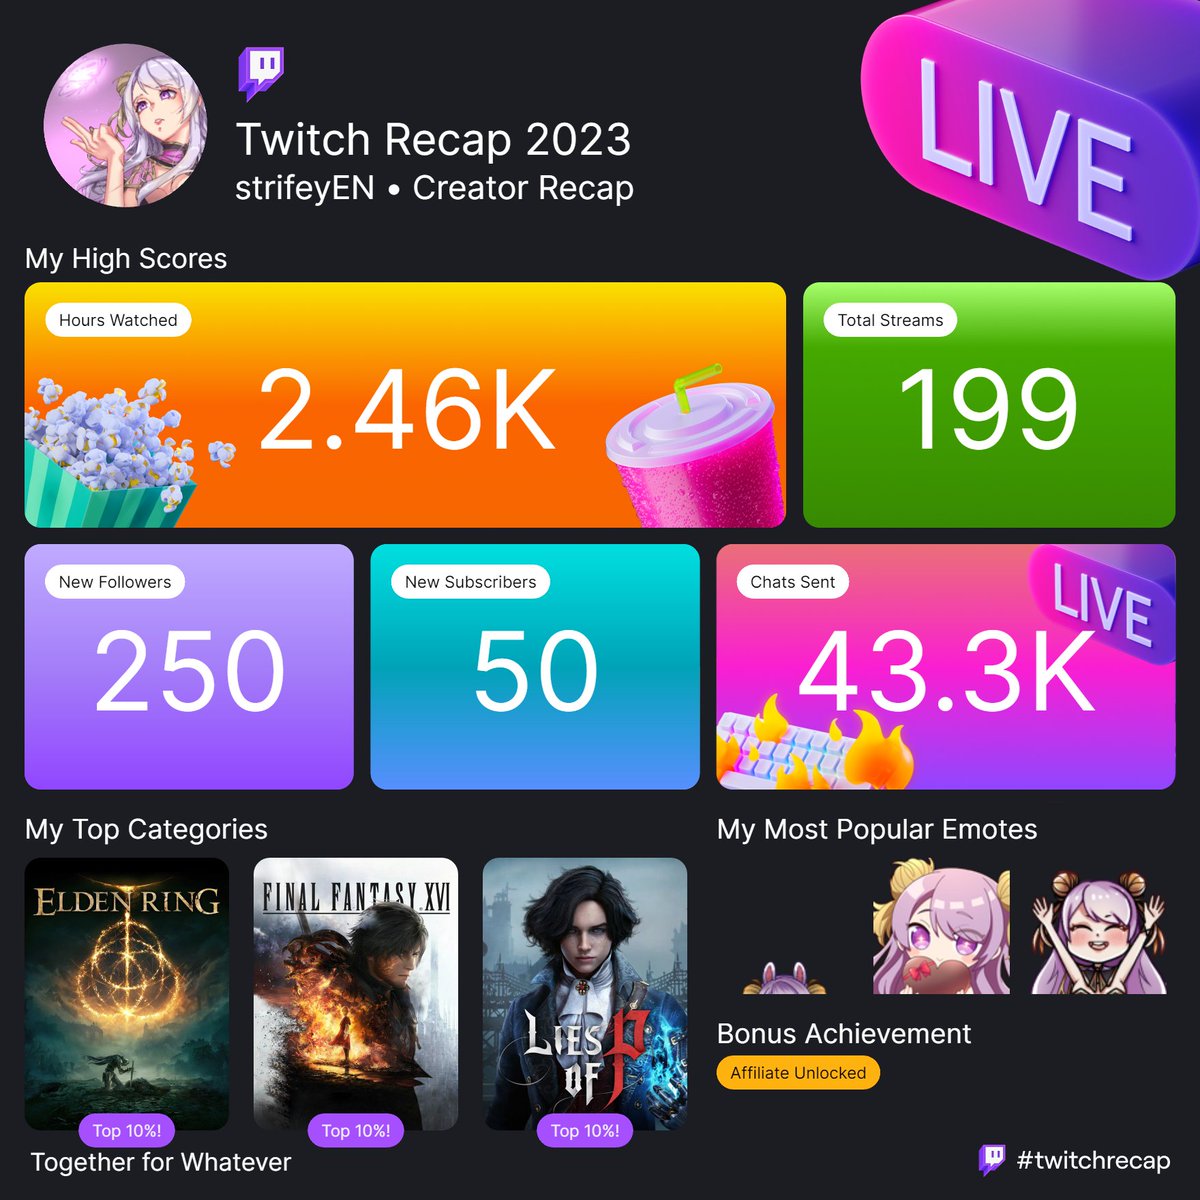 I've had such a blast this year with streaming! It's been a journey, and I've met such wonderful people along the way. Thank you all for your kind support! Here's to another year together. 🥂 #twitchrecap #twitchrecap2023